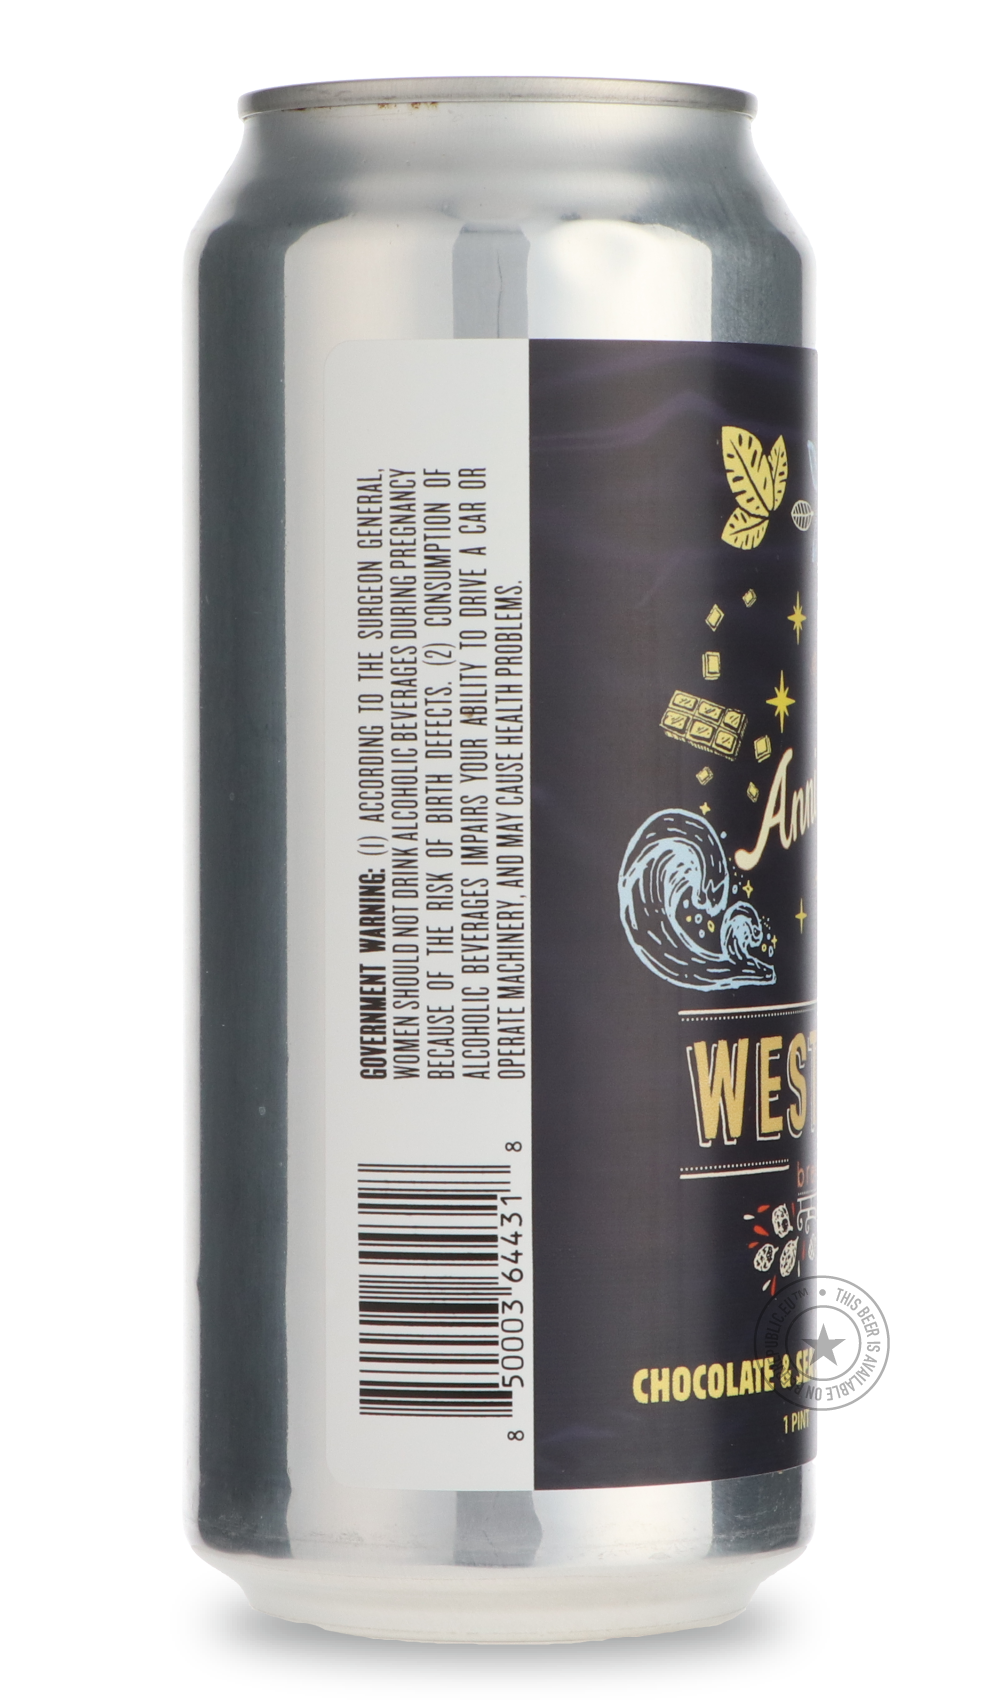 -Westbrook- 13th Anniversary Chocolate & Sea Salt-Stout & Porter- Only @ Beer Republic - The best online beer store for American & Canadian craft beer - Buy beer online from the USA and Canada - Bier online kopen - Amerikaans bier kopen - Craft beer store - Craft beer kopen - Amerikanisch bier kaufen - Bier online kaufen - Acheter biere online - IPA - Stout - Porter - New England IPA - Hazy IPA - Imperial Stout - Barrel Aged - Barrel Aged Imperial Stout - Brown - Dark beer - Blond - Blonde - Pilsner - Lager